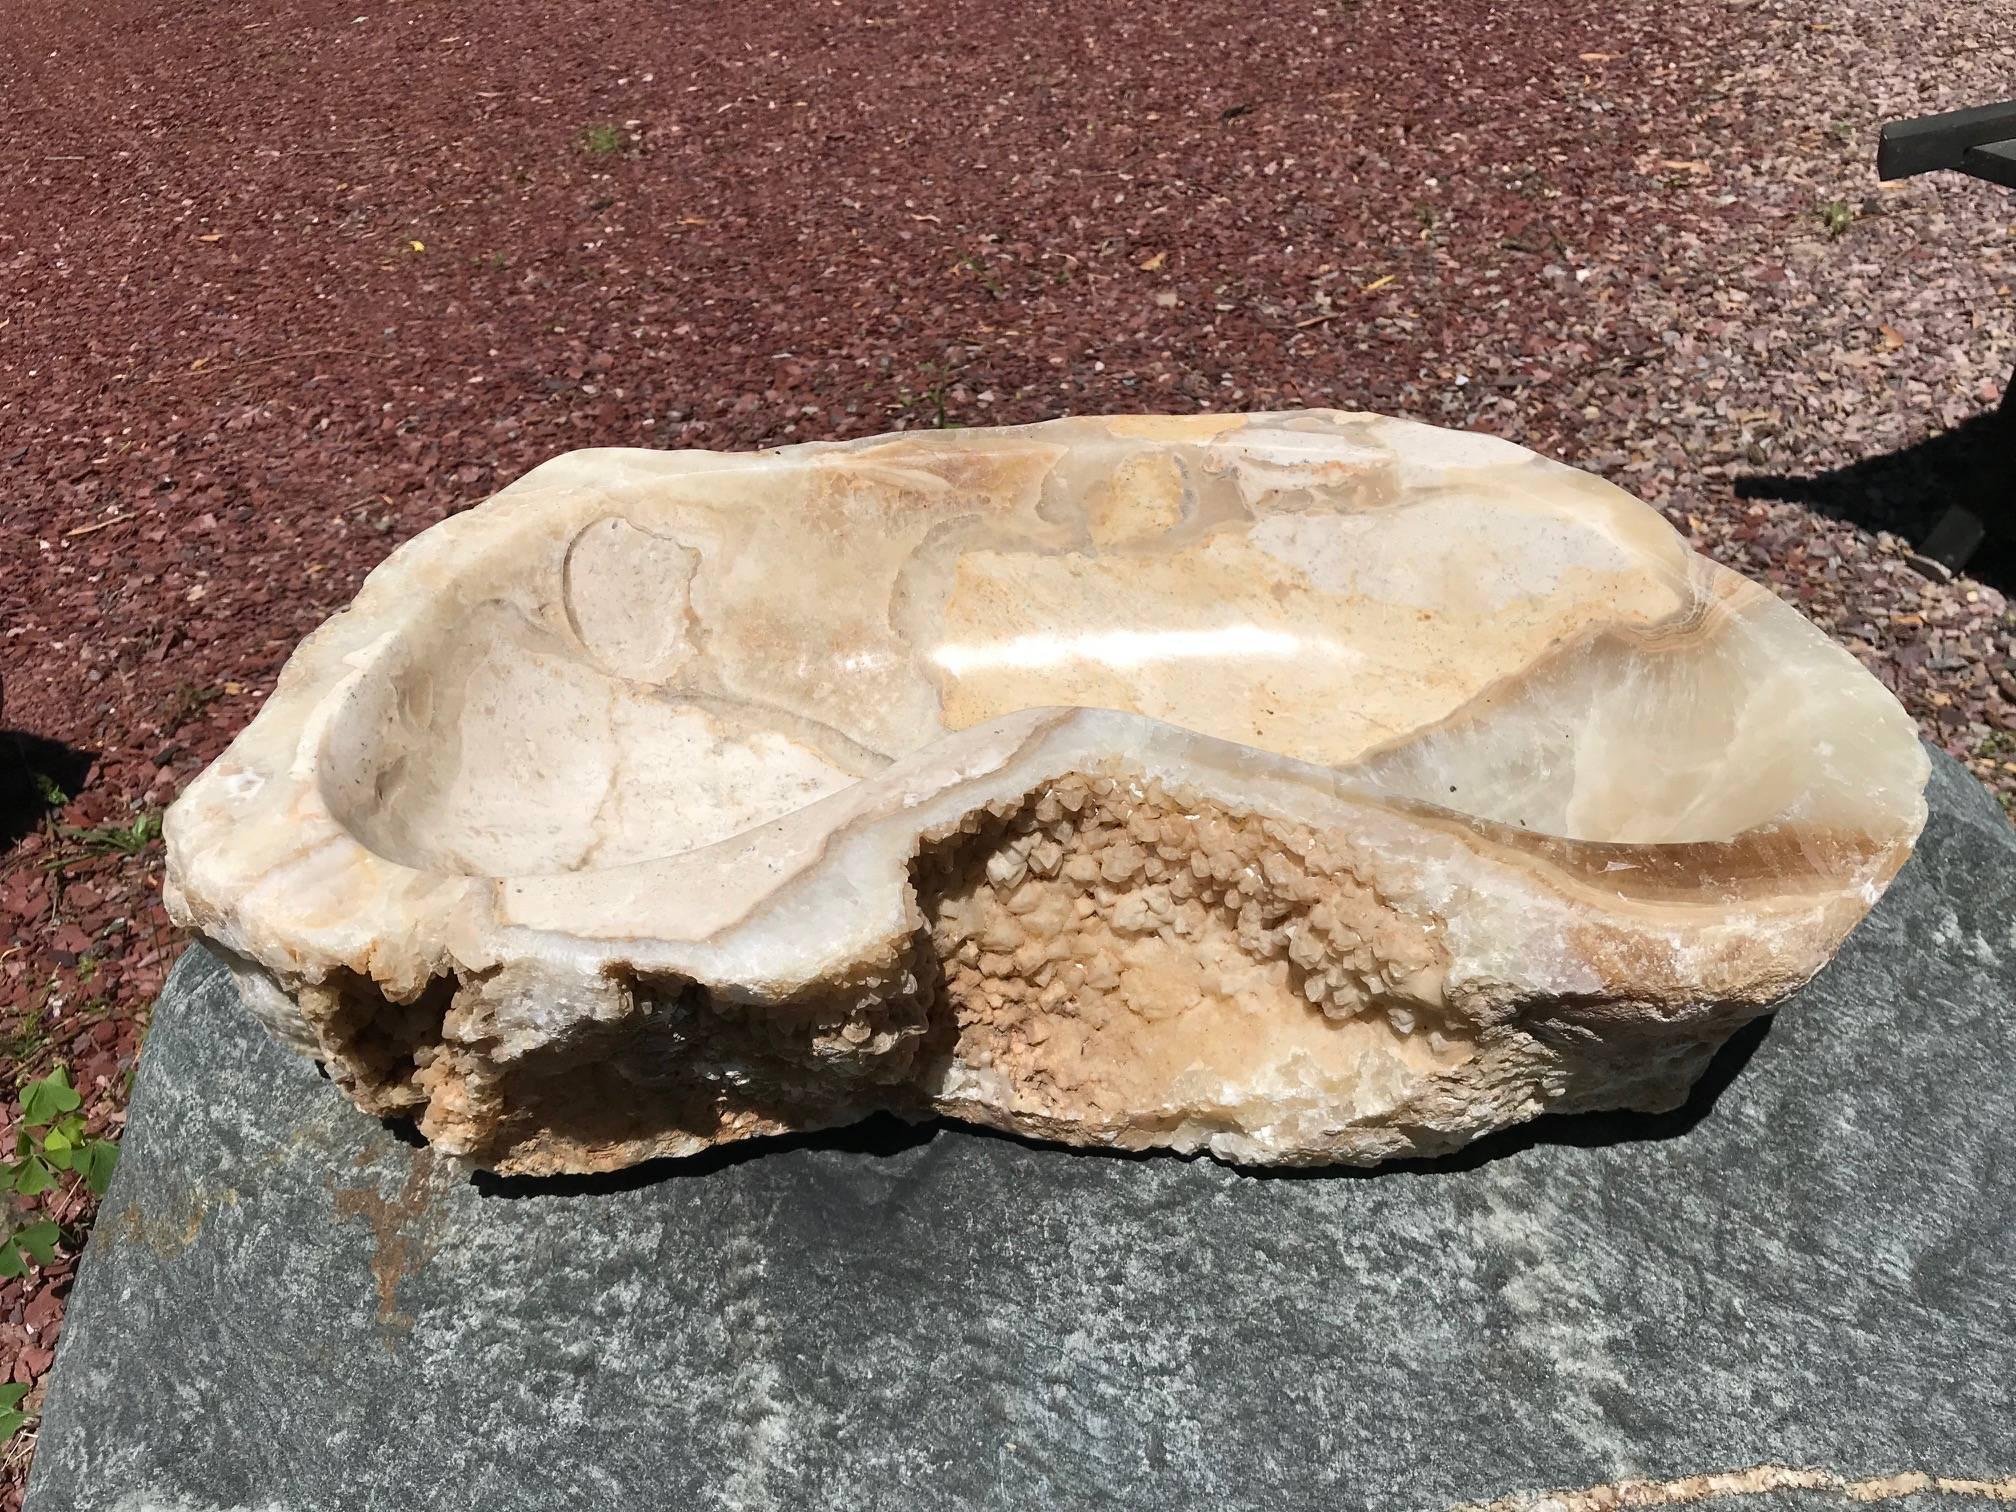 For your special garden

A one-of-a-kind visually attractive -kidney shaped- Classic precious stone 
garden planter or water basin hand-carved from multicolored onyx stone.

In an organic natural form.

Beautiful simple design.

Totally natural